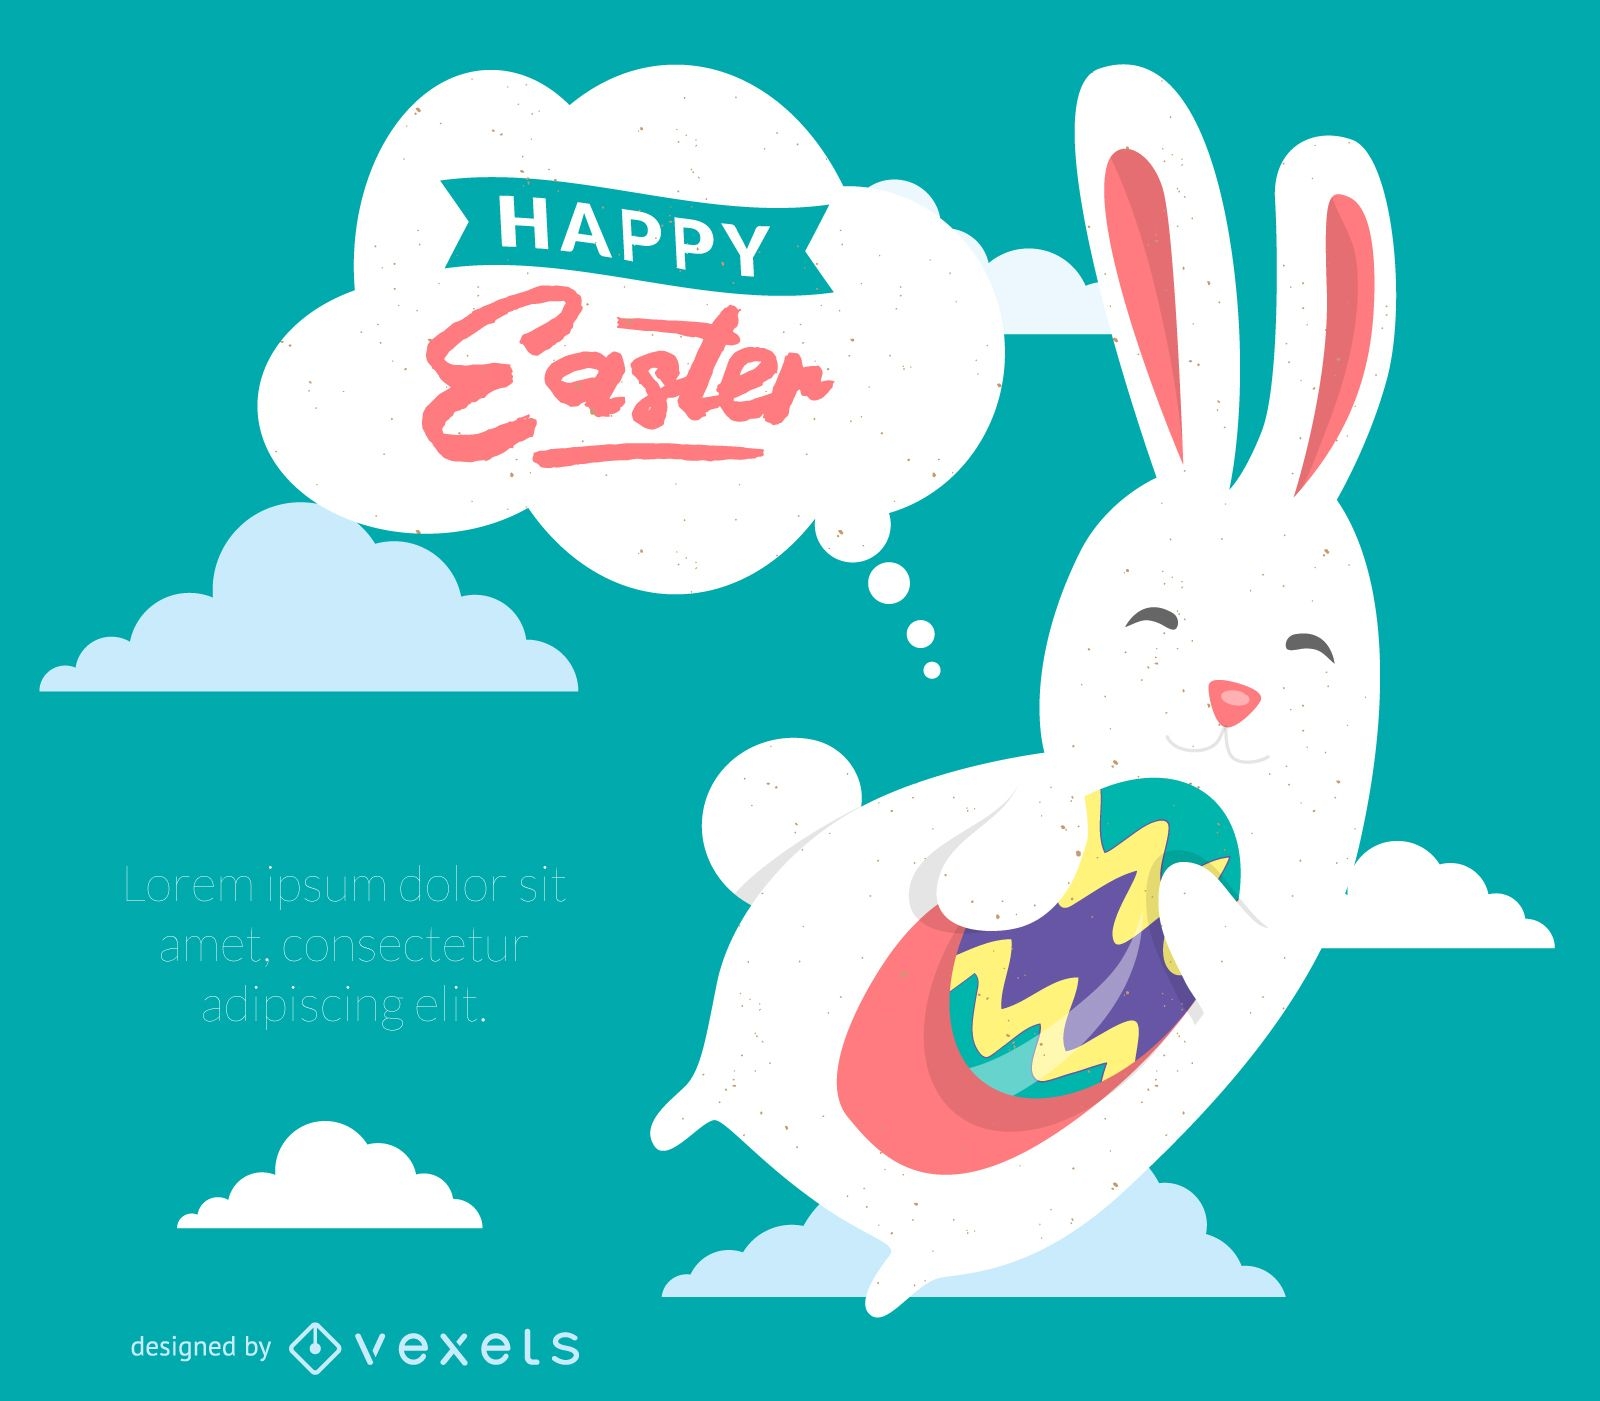 Happy Easter poster with bunny illustration